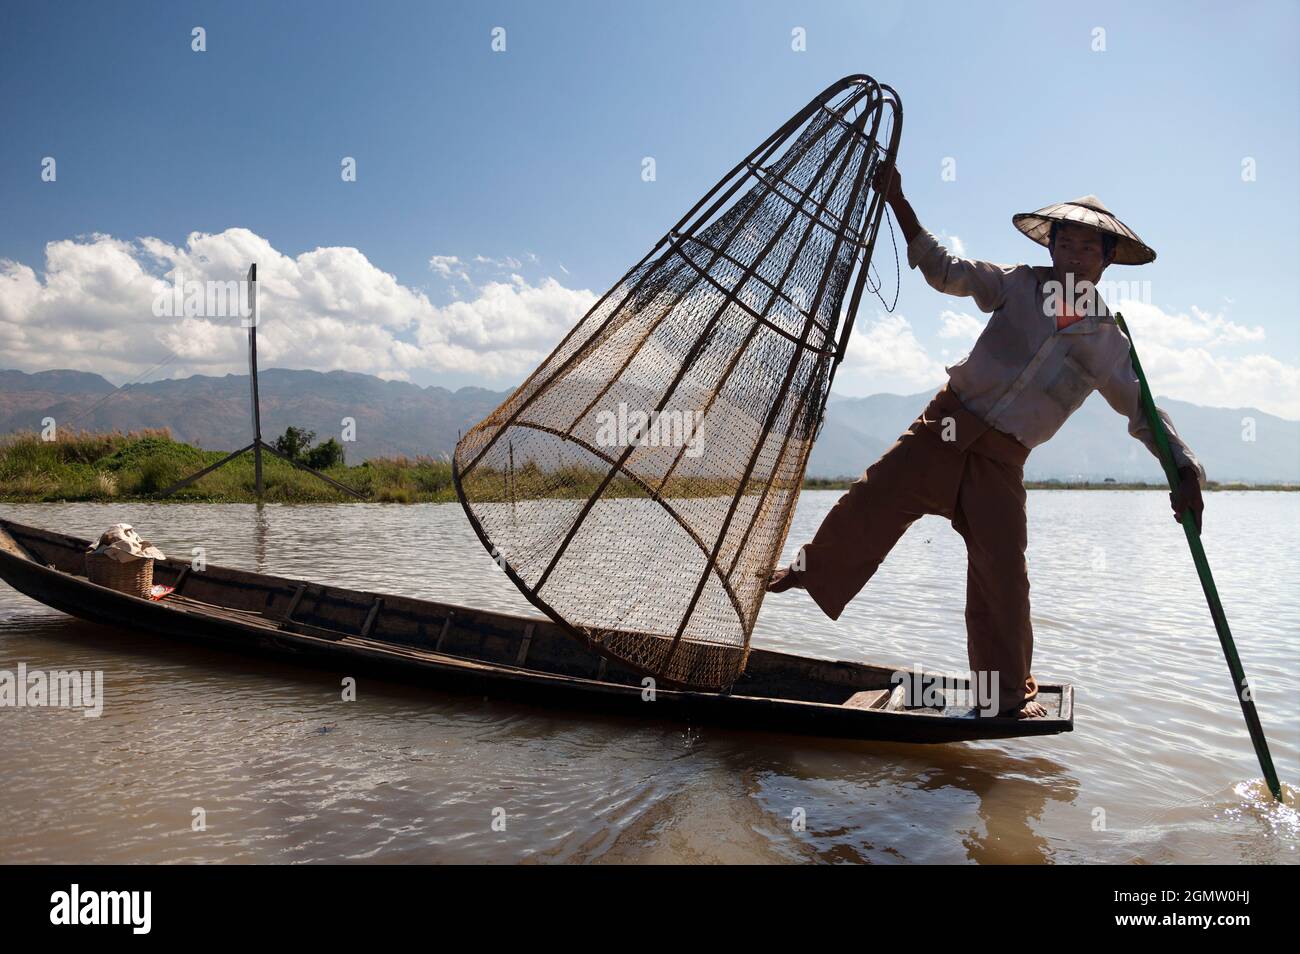 https://c8.alamy.com/comp/2GMW0HJ/lake-inle-myanmar-1-february-2013-inle-lake-is-a-large-and-scenic-freshwater-lake-located-in-the-nyaungshwe-township-of-shan-state-part-of-shan-h-2GMW0HJ.jpg